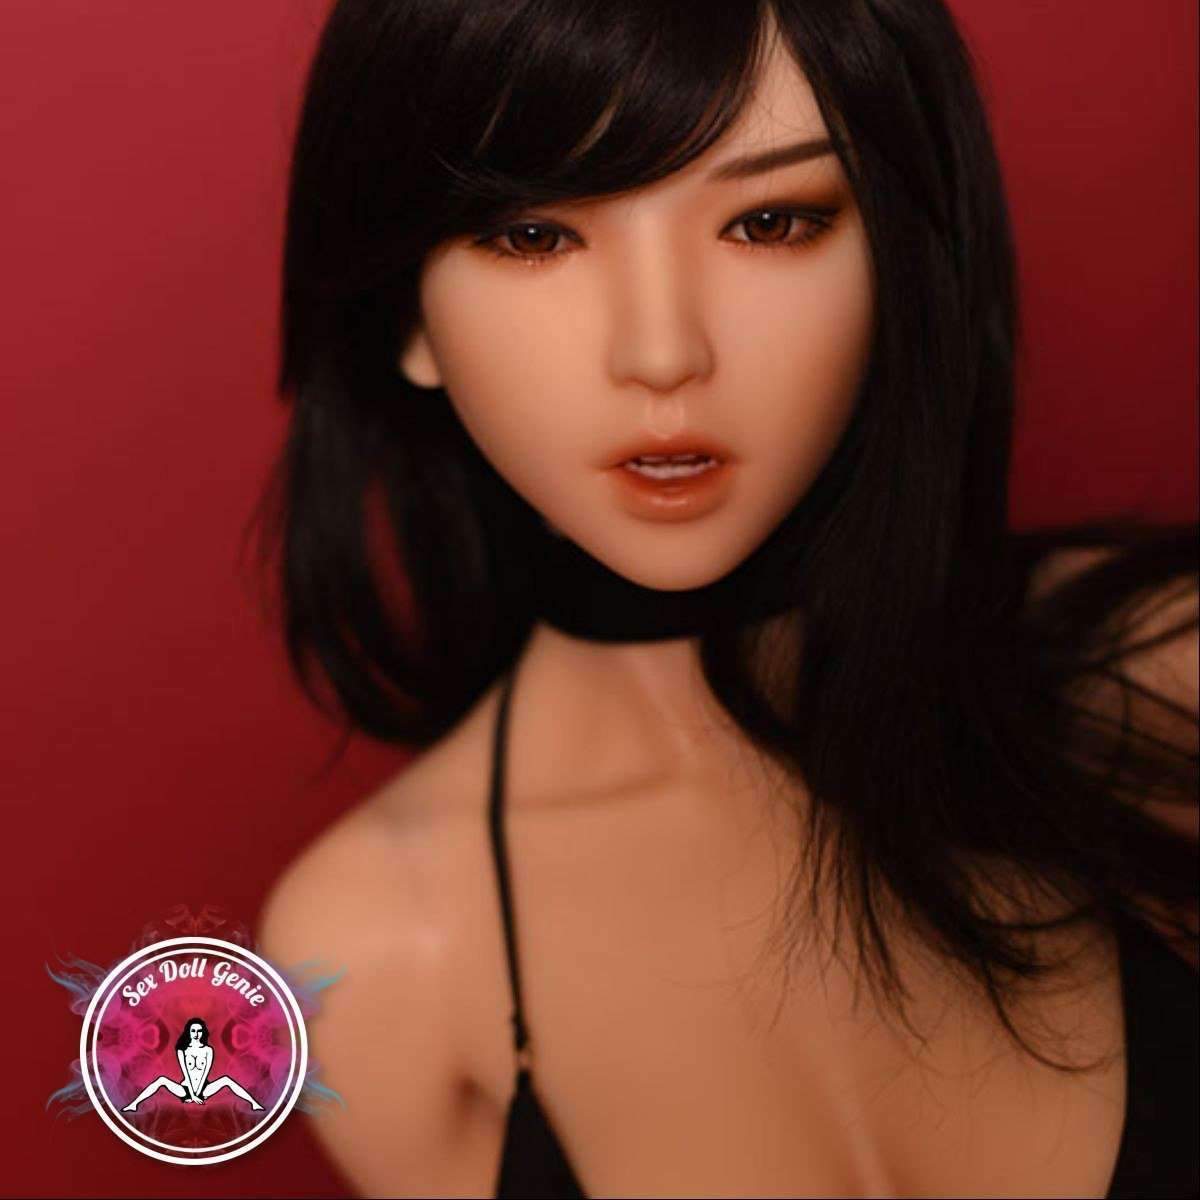 DS Doll - 167cm - Kayla Head - Type 3 D Cup Silicone Doll-8